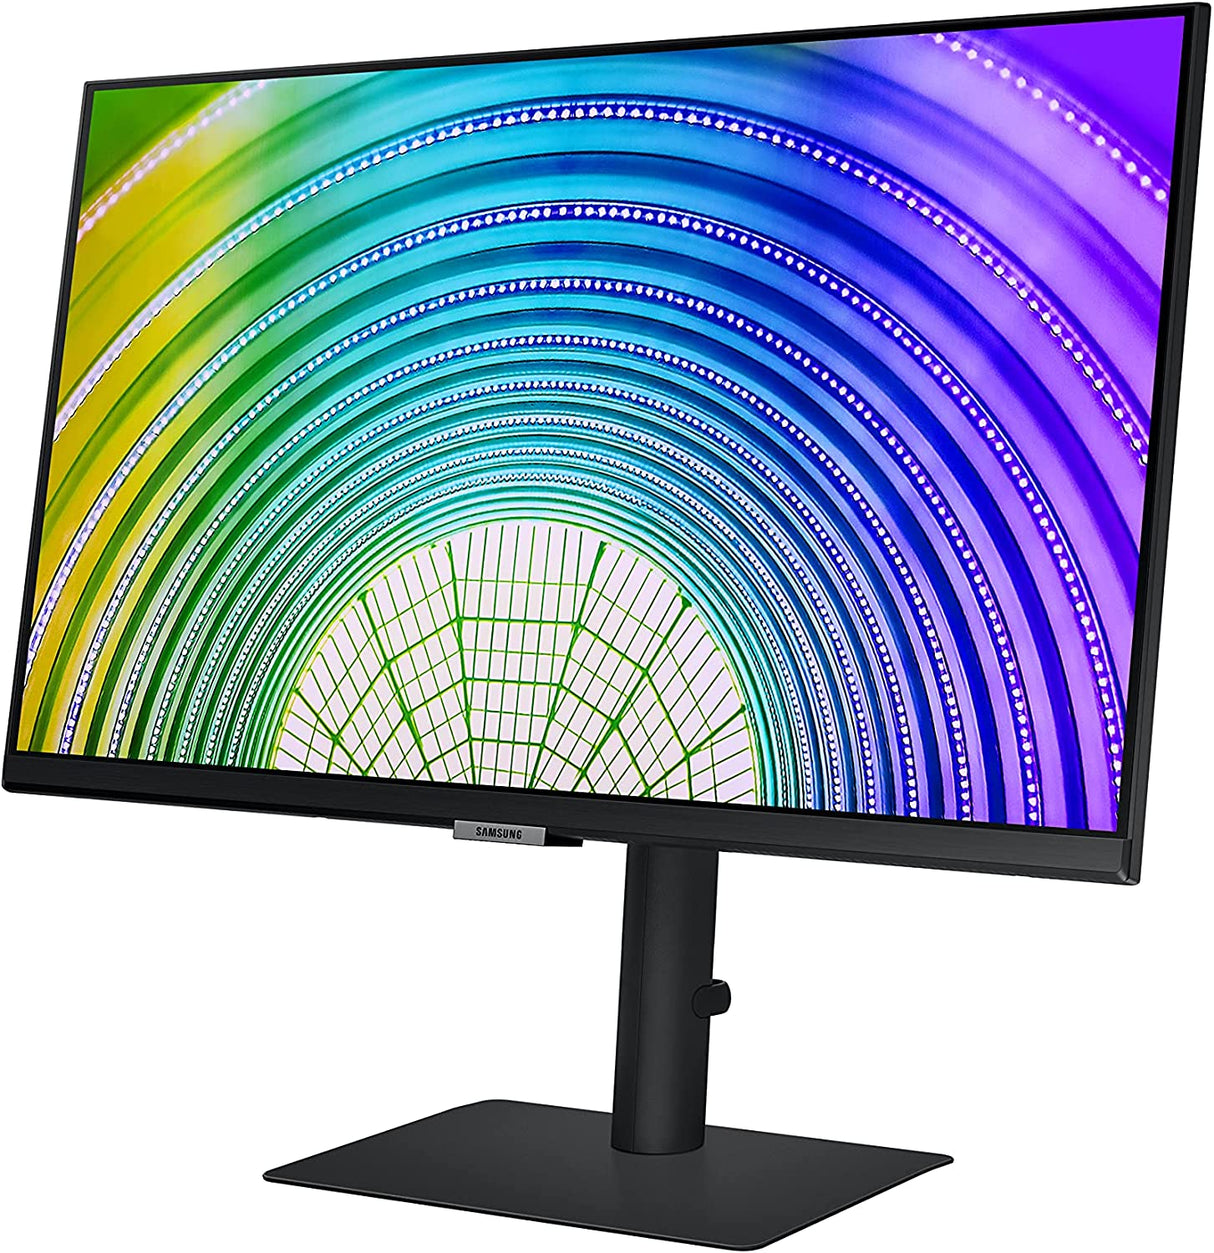 SAMSUNG S60UA Series 27-Inch WQHD (2560x1440) Computer Monitor, 75Hz, IPS Panel, USB-C, HDR10 (1 Billion Colors), Height Adjustable Stand, TUV-Certified Intelligent Eye Care (LS27A600UUNXGO) 27 in QHD HDR10 with USB-C